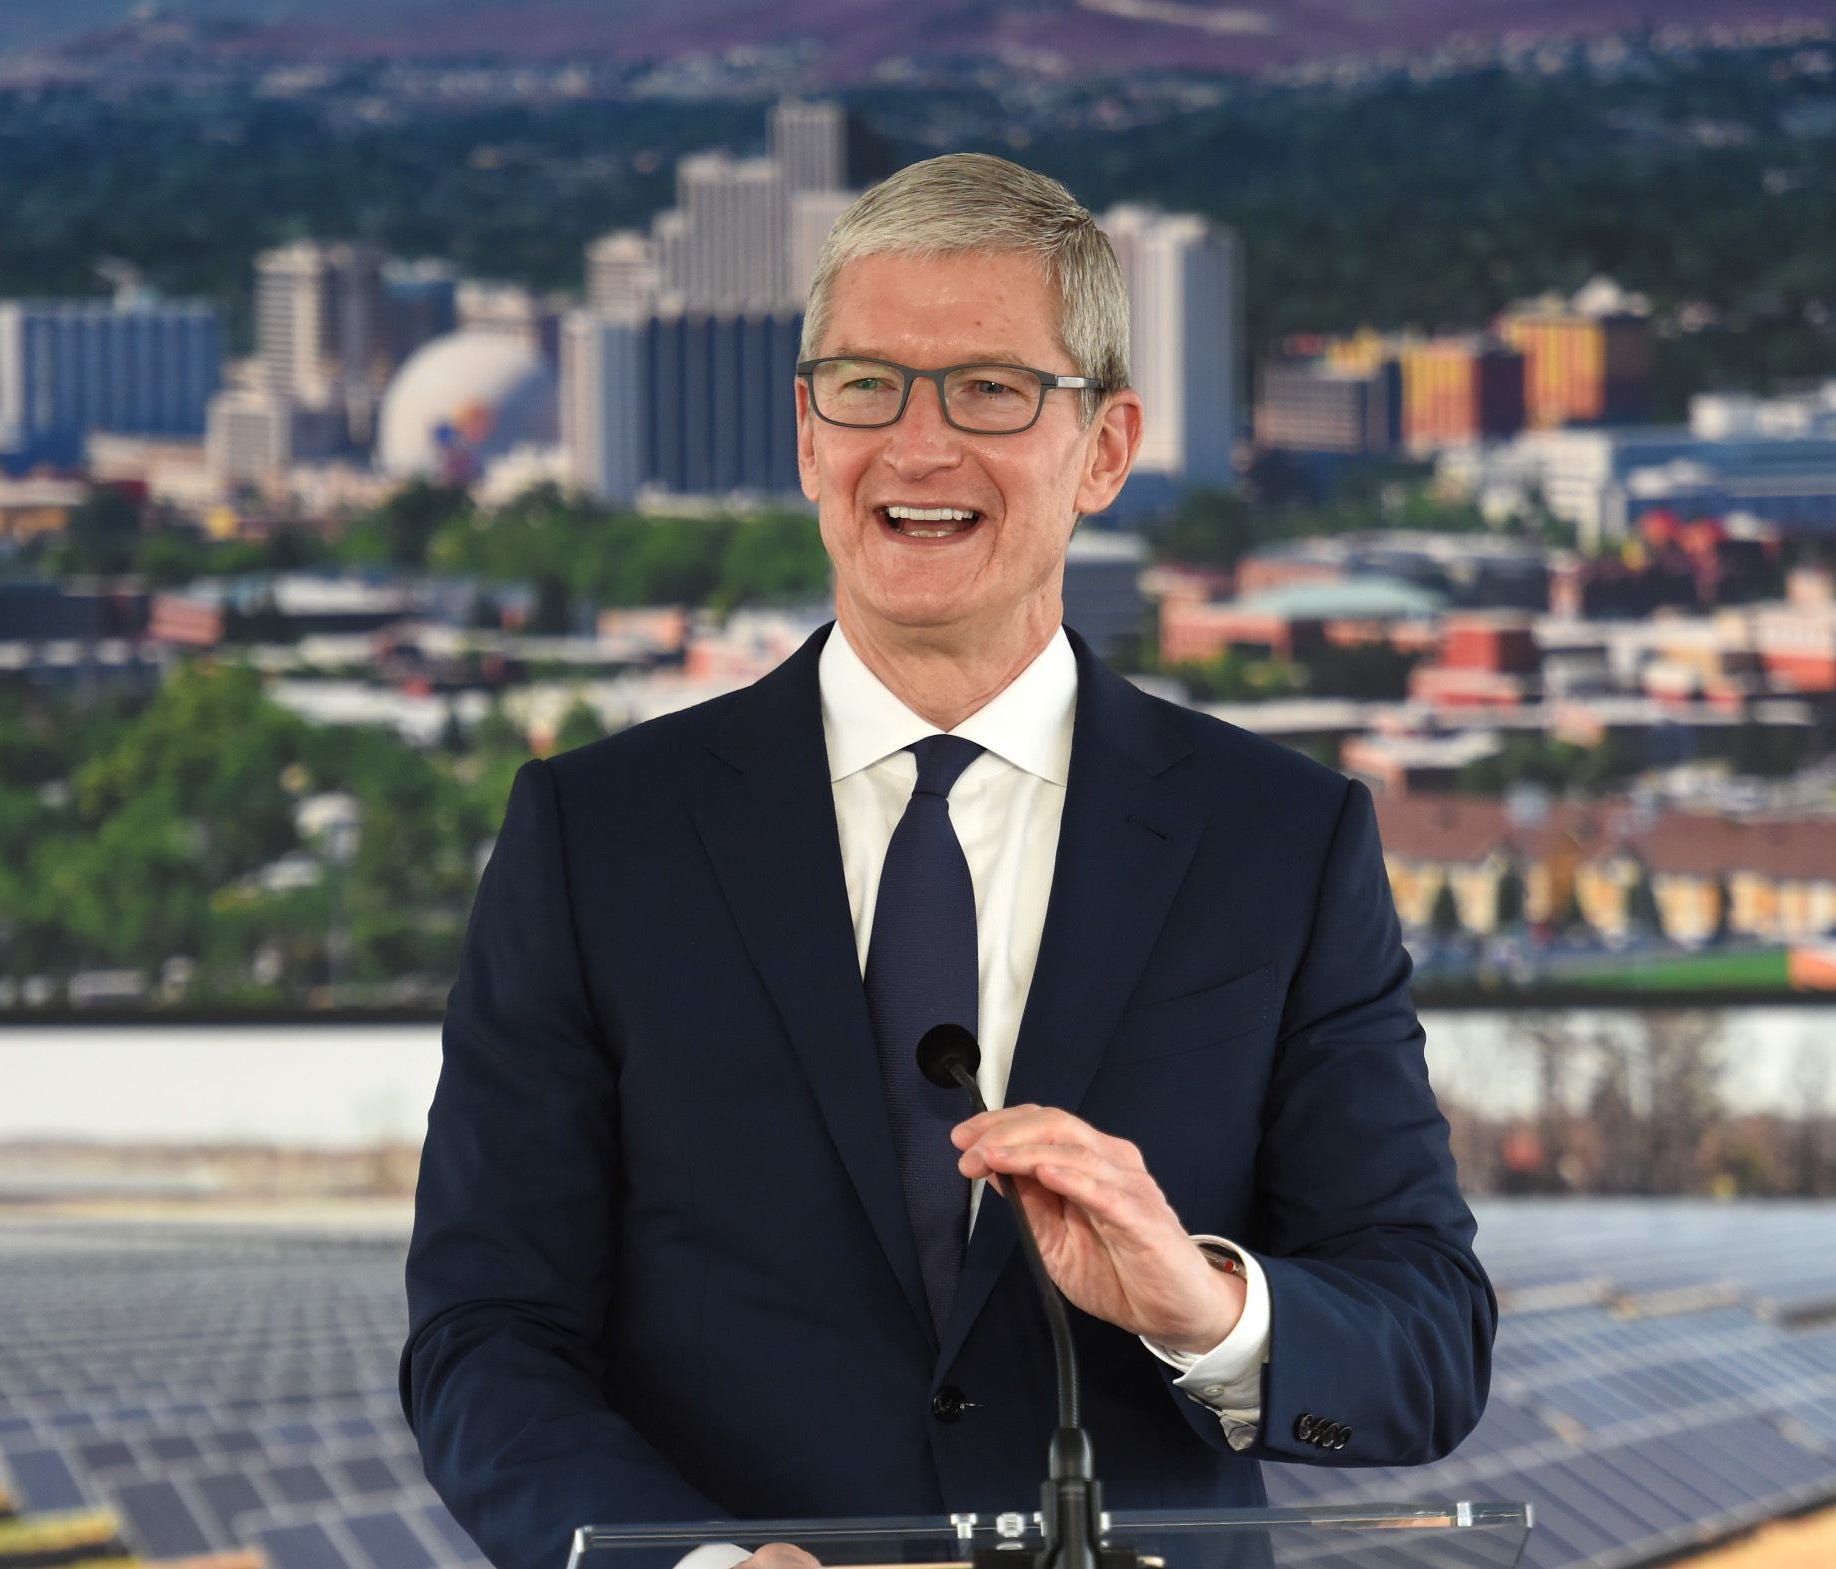 Apple CEO Tim Cook visited Reno for the groundbreaking ceremony of Apple's downtown Reno facility on Jan. 17, 2018.